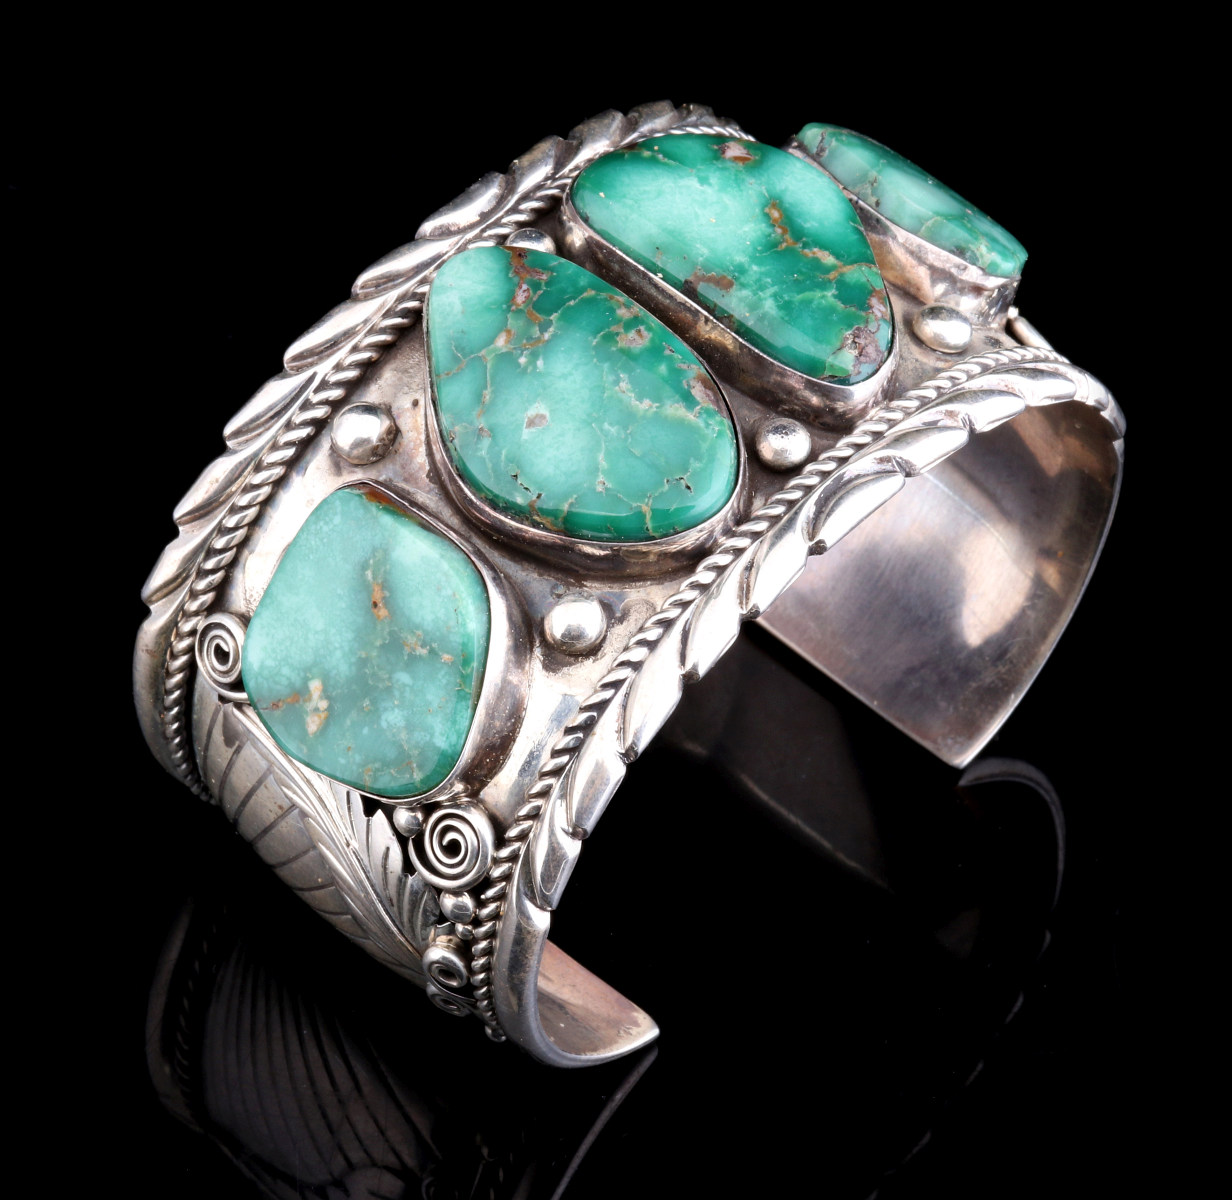 A LARGE TURQUOISE CUFF SIGNED JOANN YAZZIE